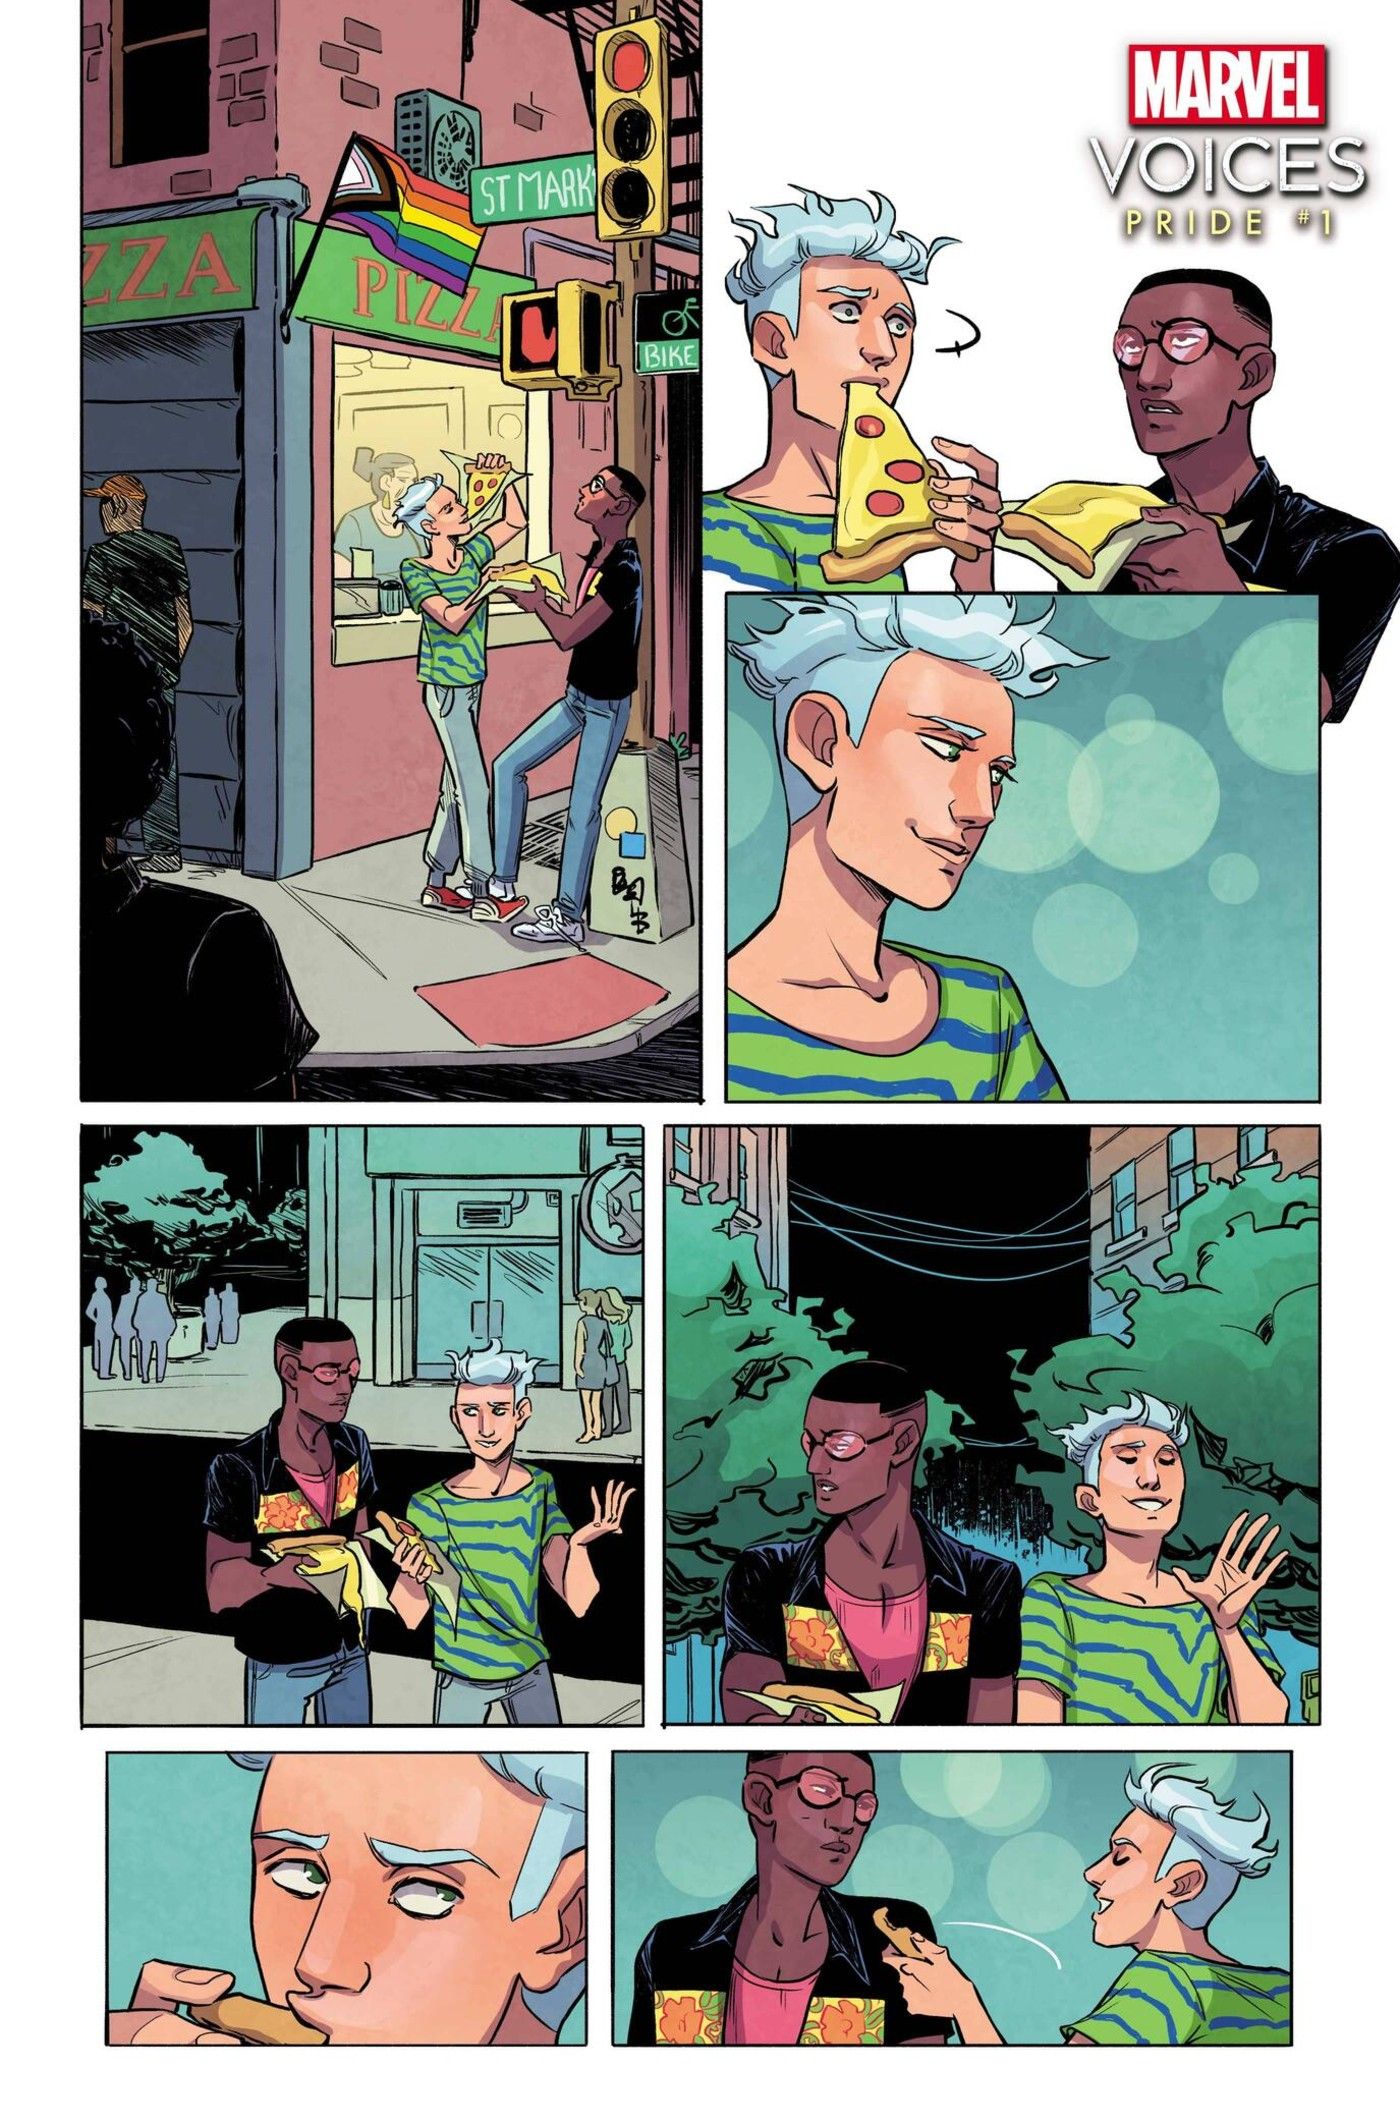 Marvel’s LGBTQ+ Characters Showcased in New Pride Special Preview